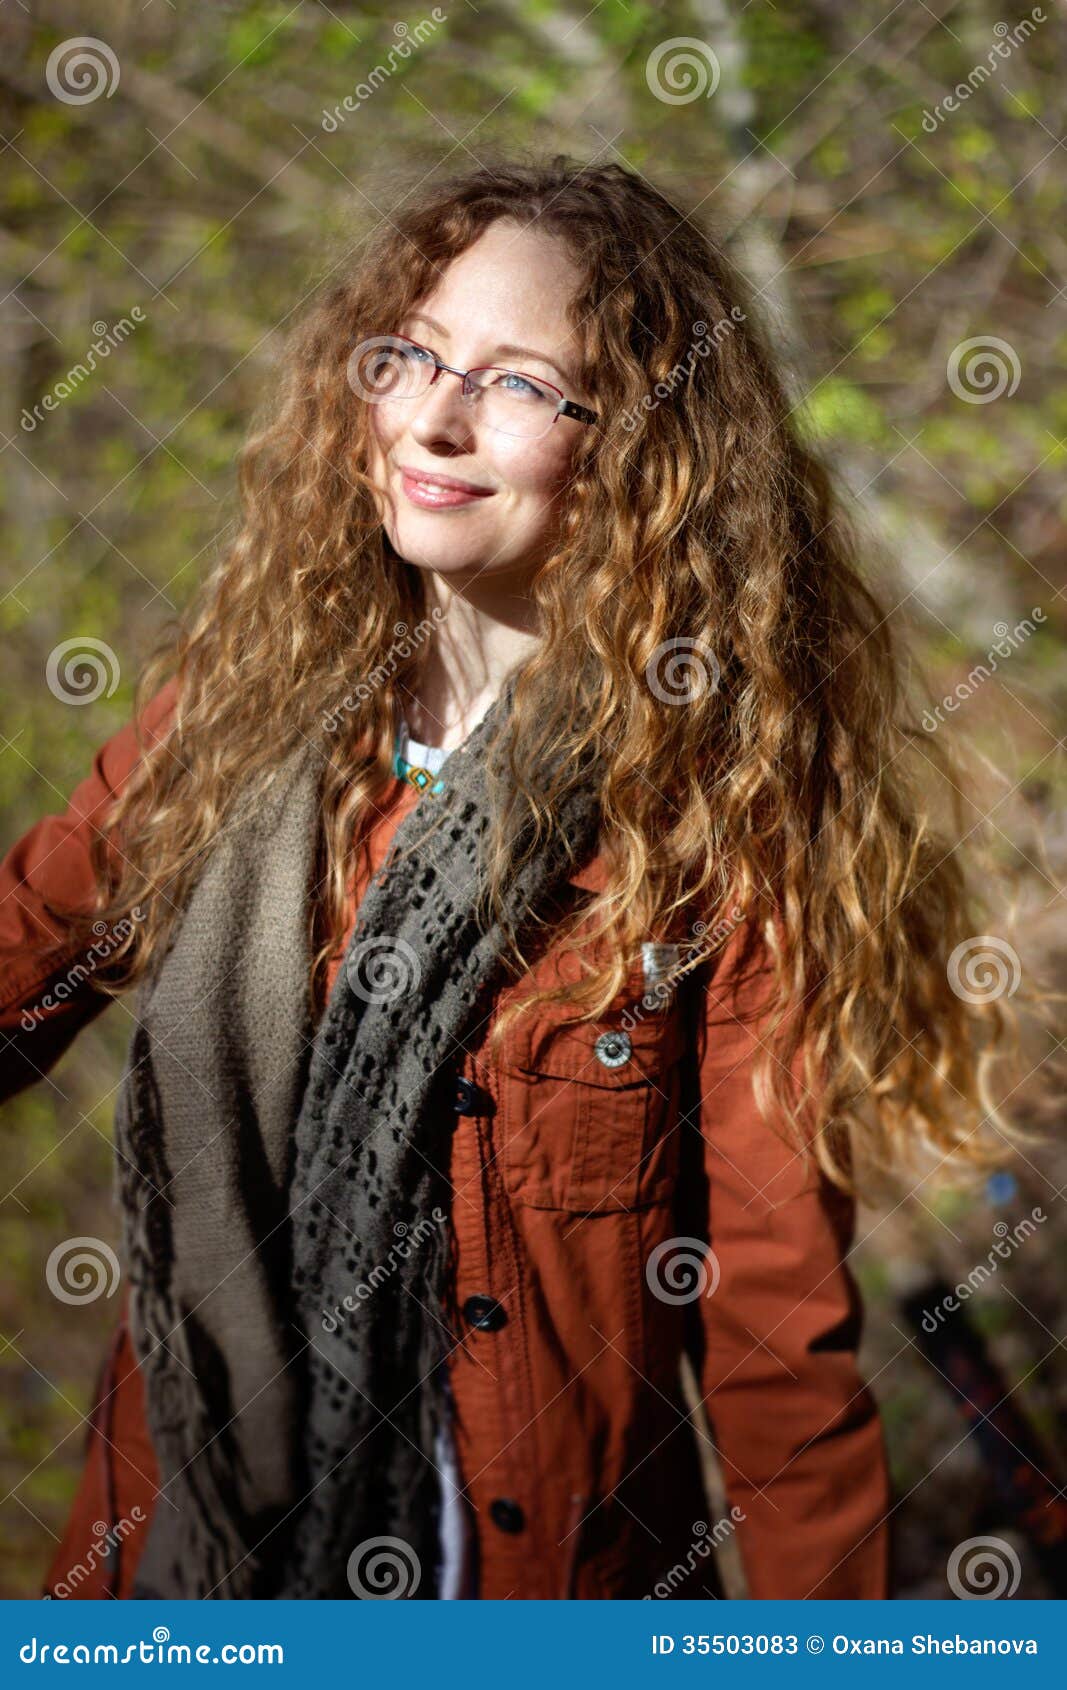 Smiling Woman With Glasses And Blonde Curly Hair On Sunny